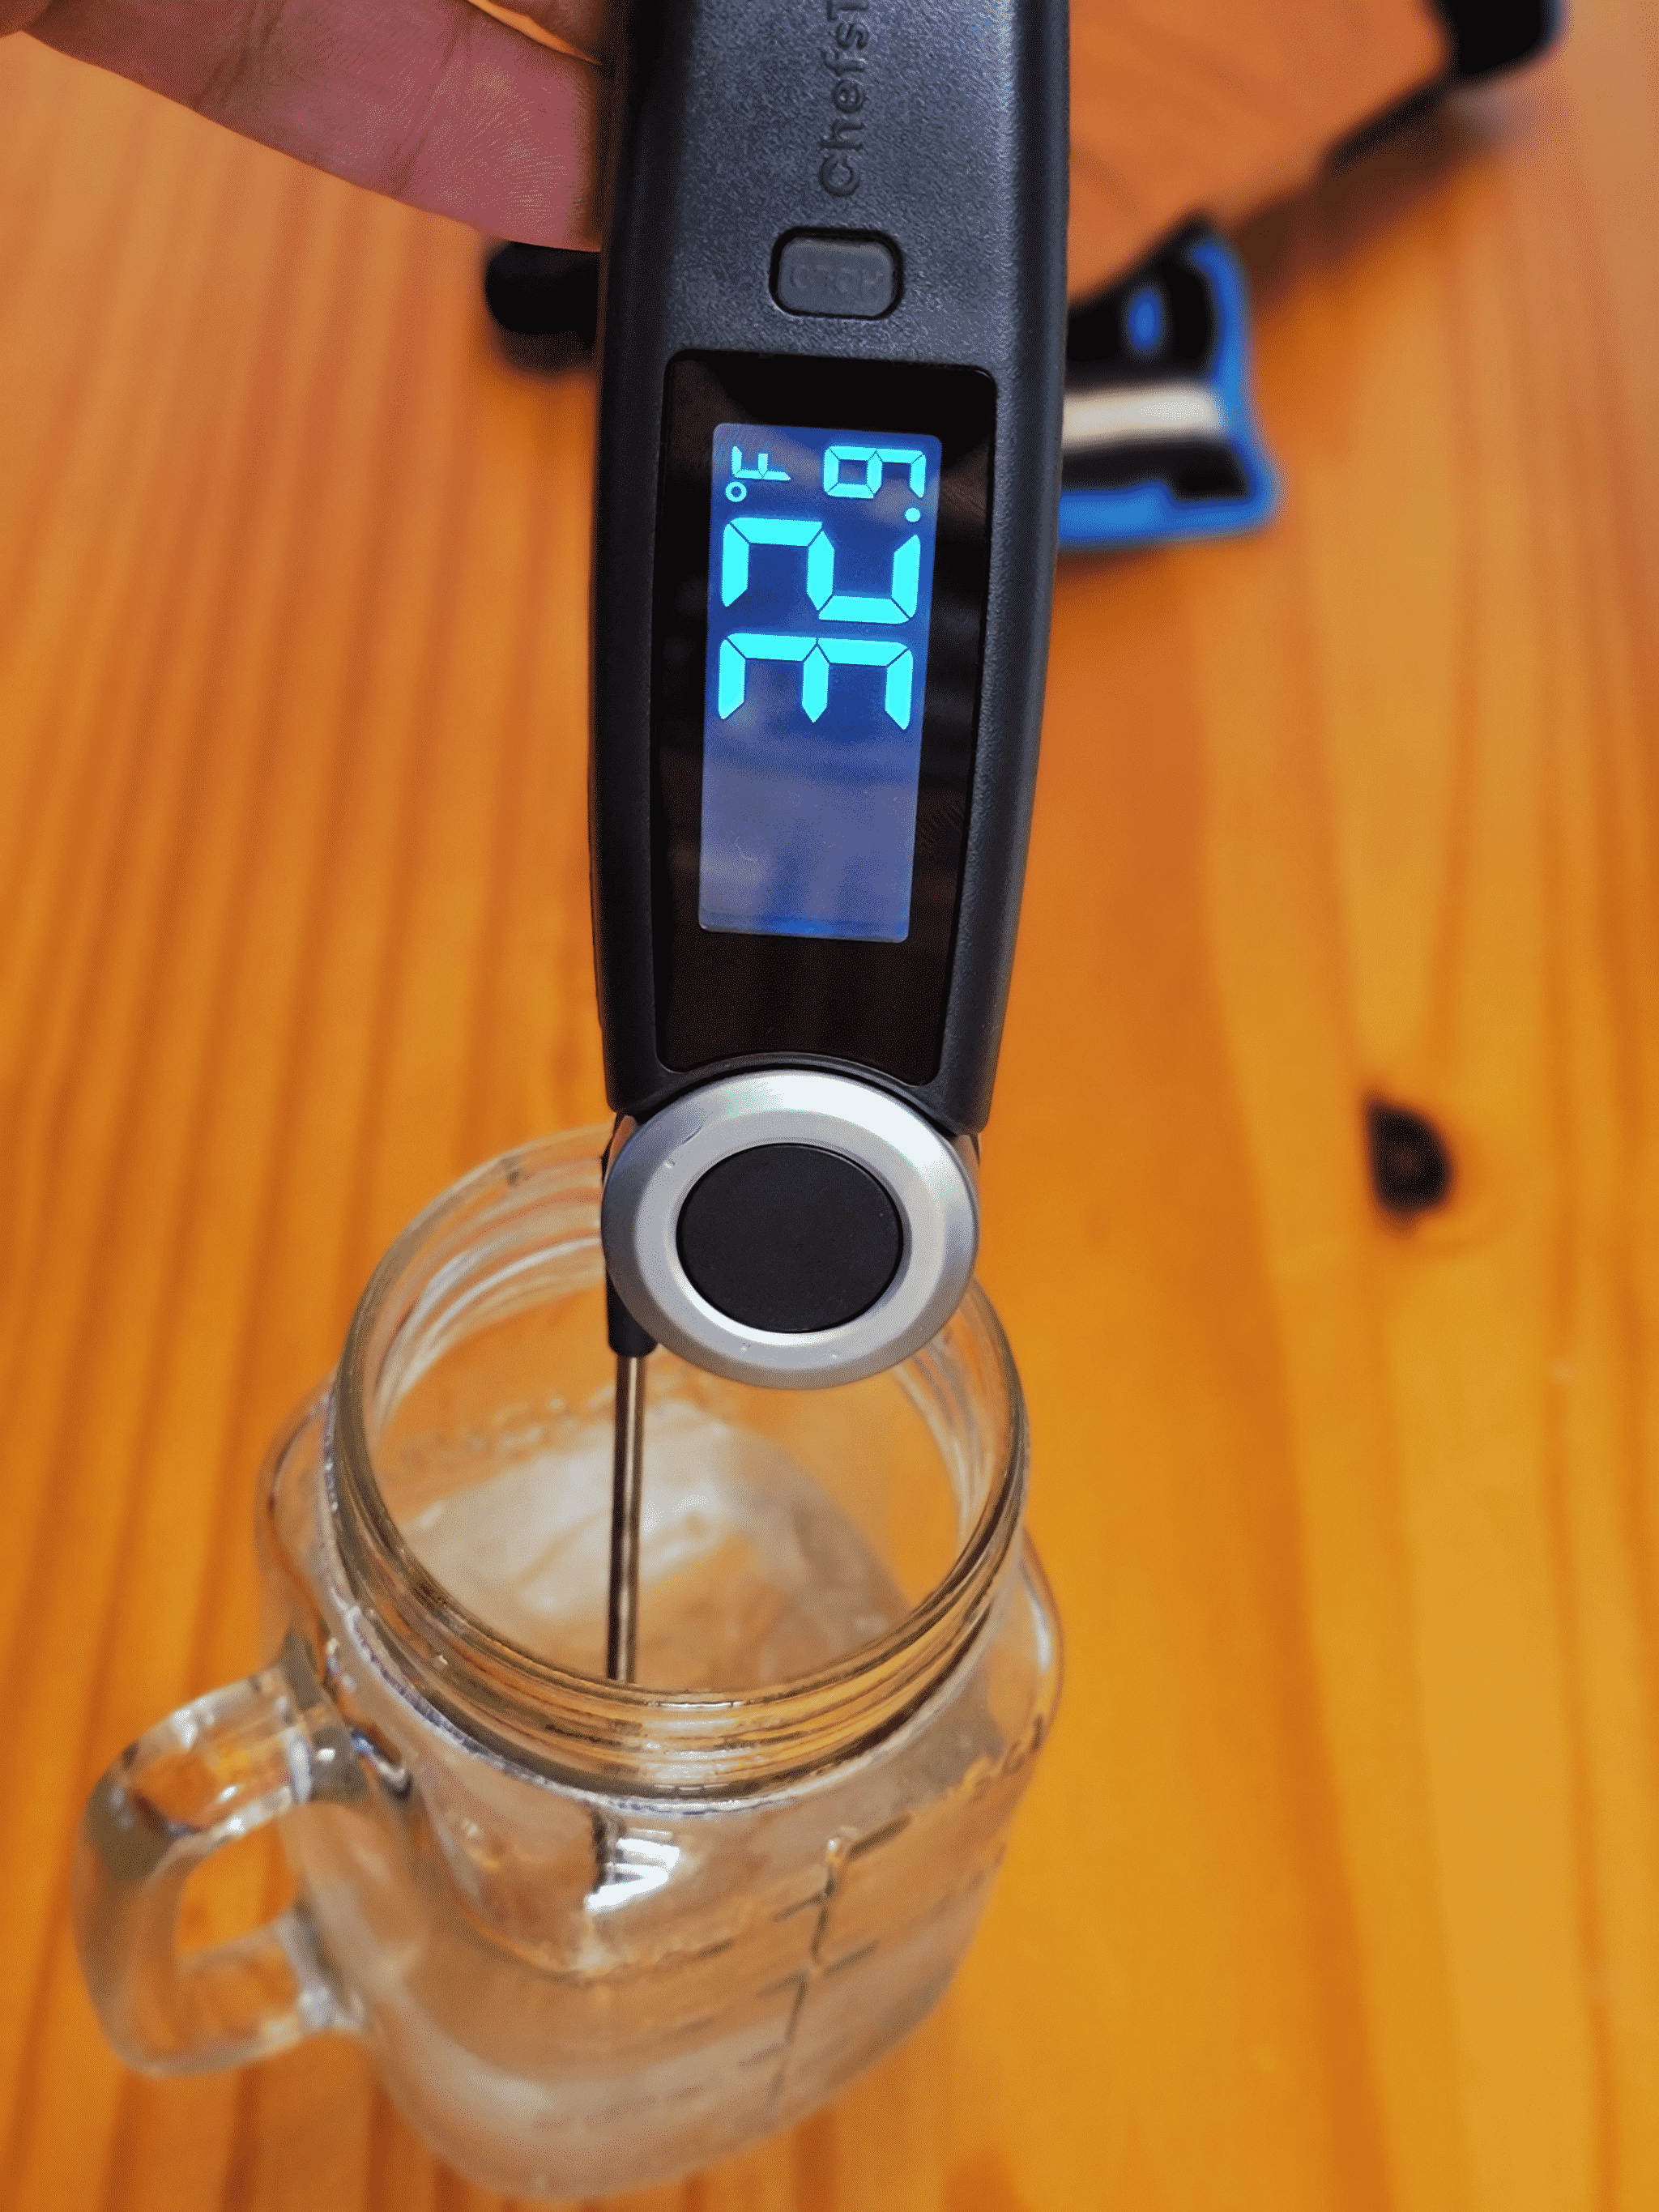 thermometer reading the temperature of ice water